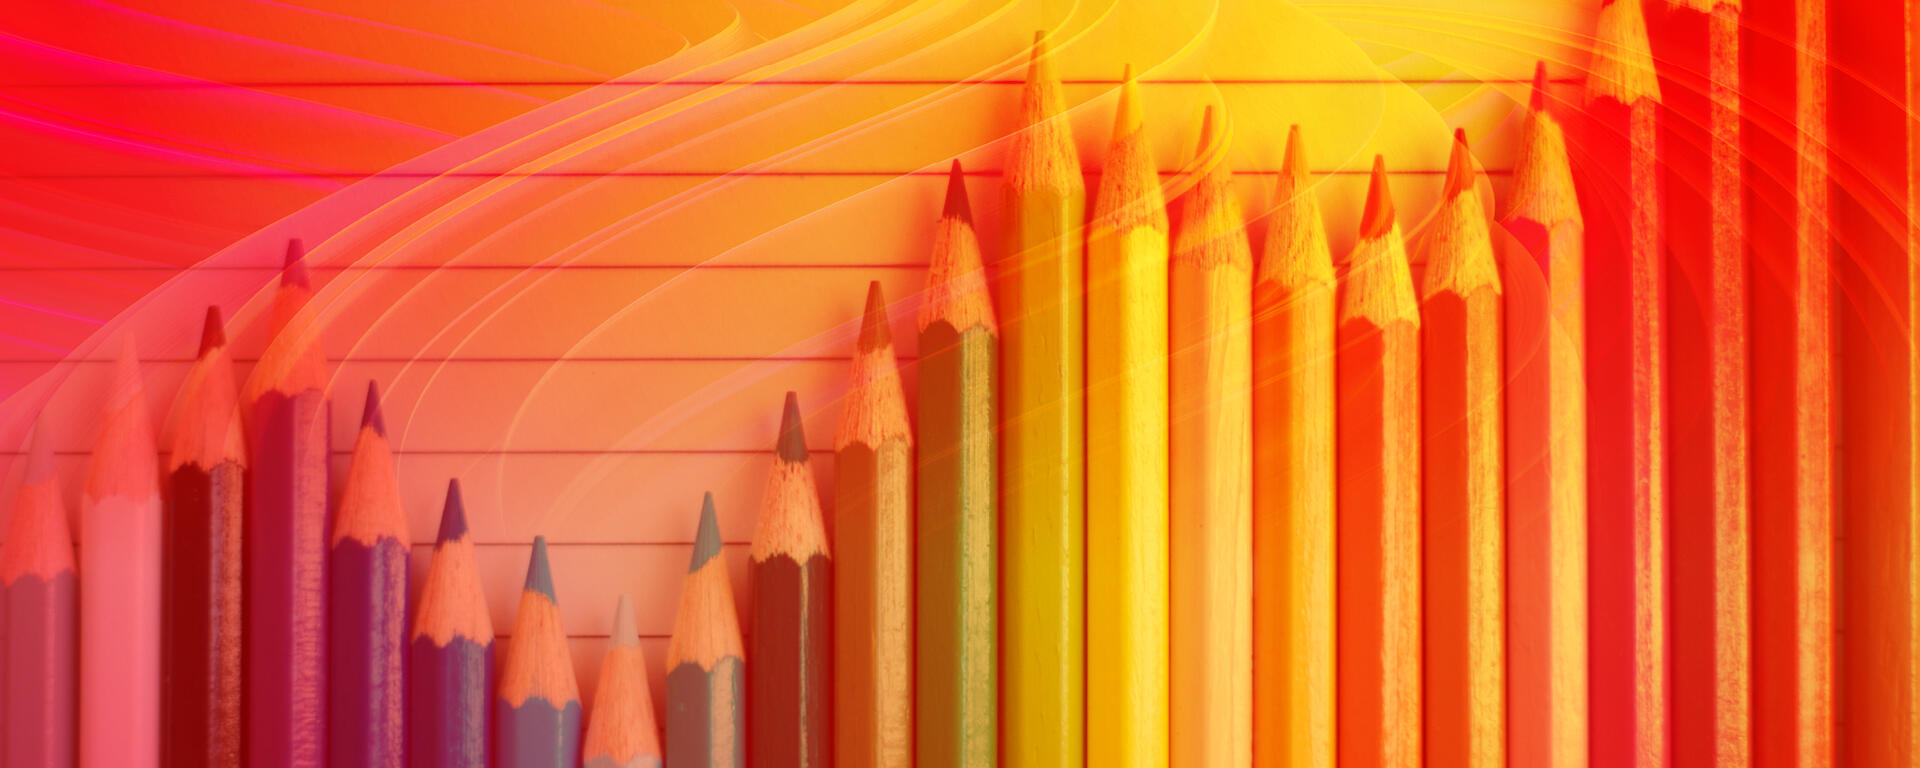 Wavy row of coloured pencils with red and yellow background